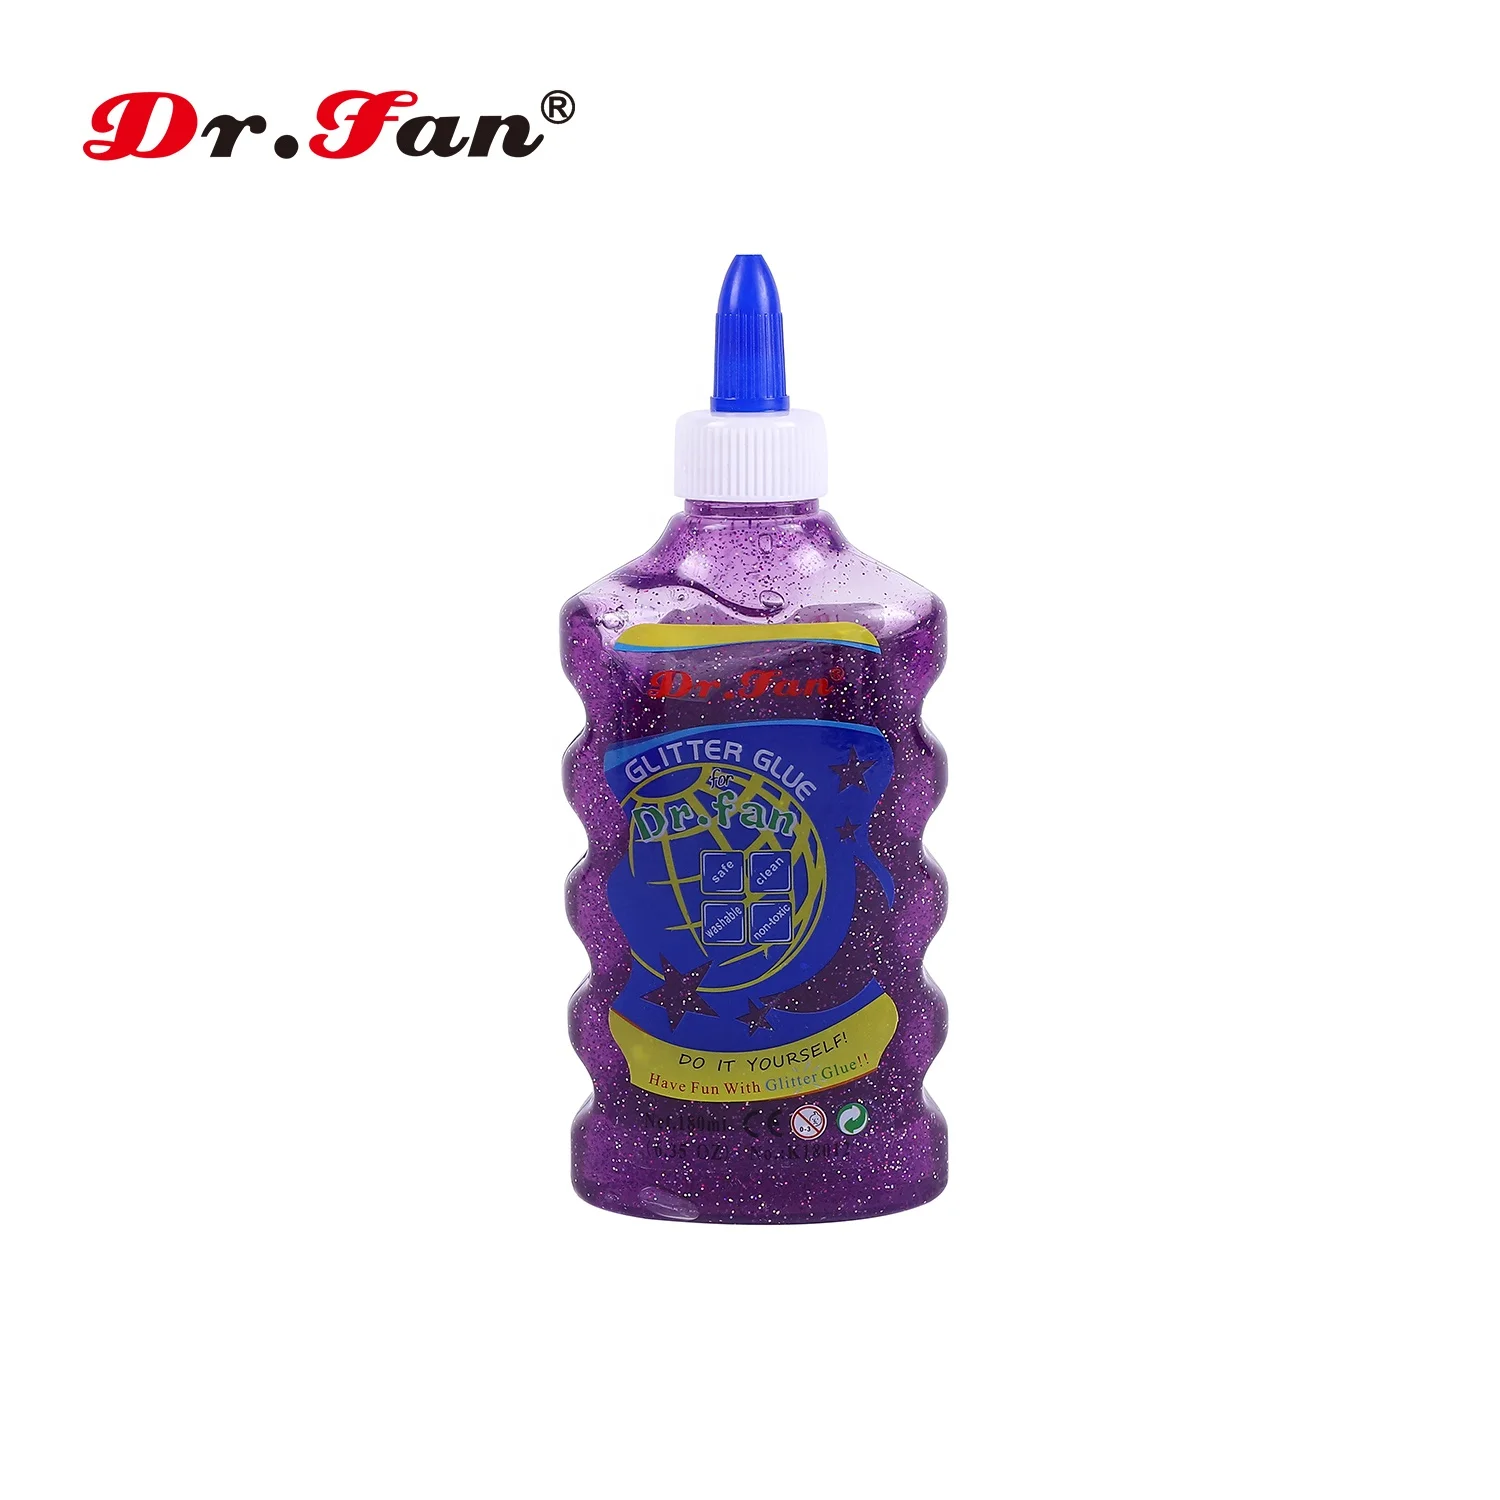 
180ml drfan Glitter Glue for slime Crafting DIY OEM Bottle Key Packing Holiday Package Feature Decoration 